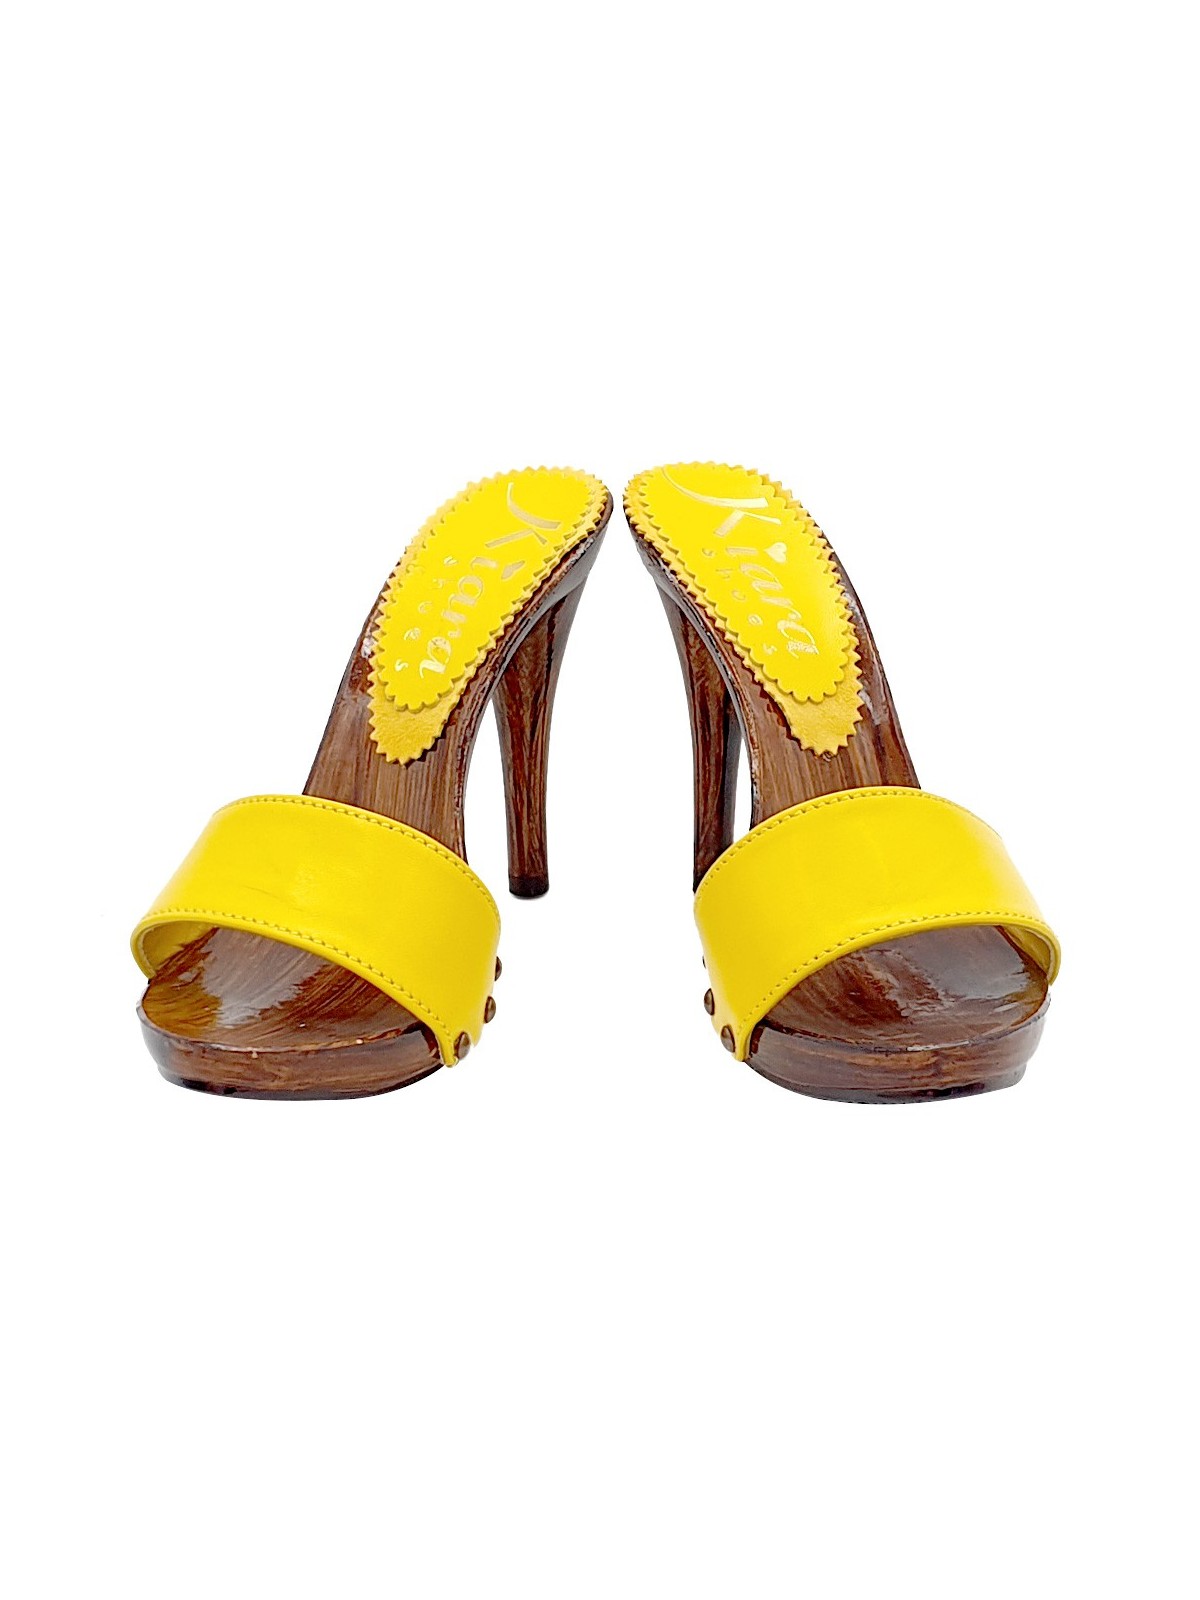 YELLOW CLOGS WITH LEATHER BAND AND HIGH HEEL